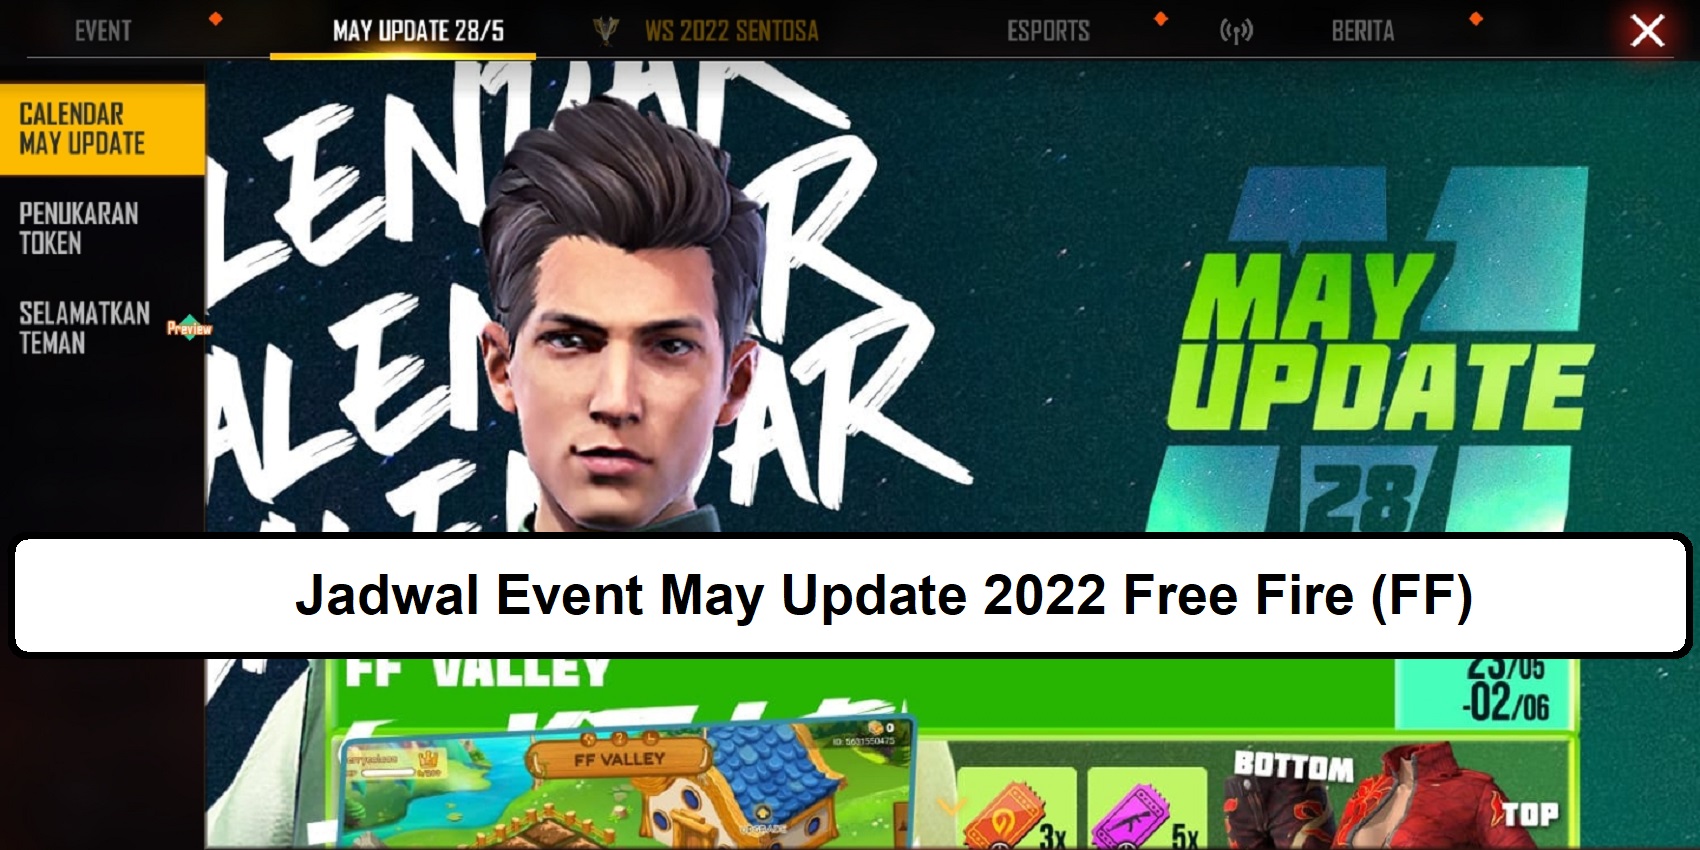 Jadwal Event May Update 2022 Free Fire (FF)